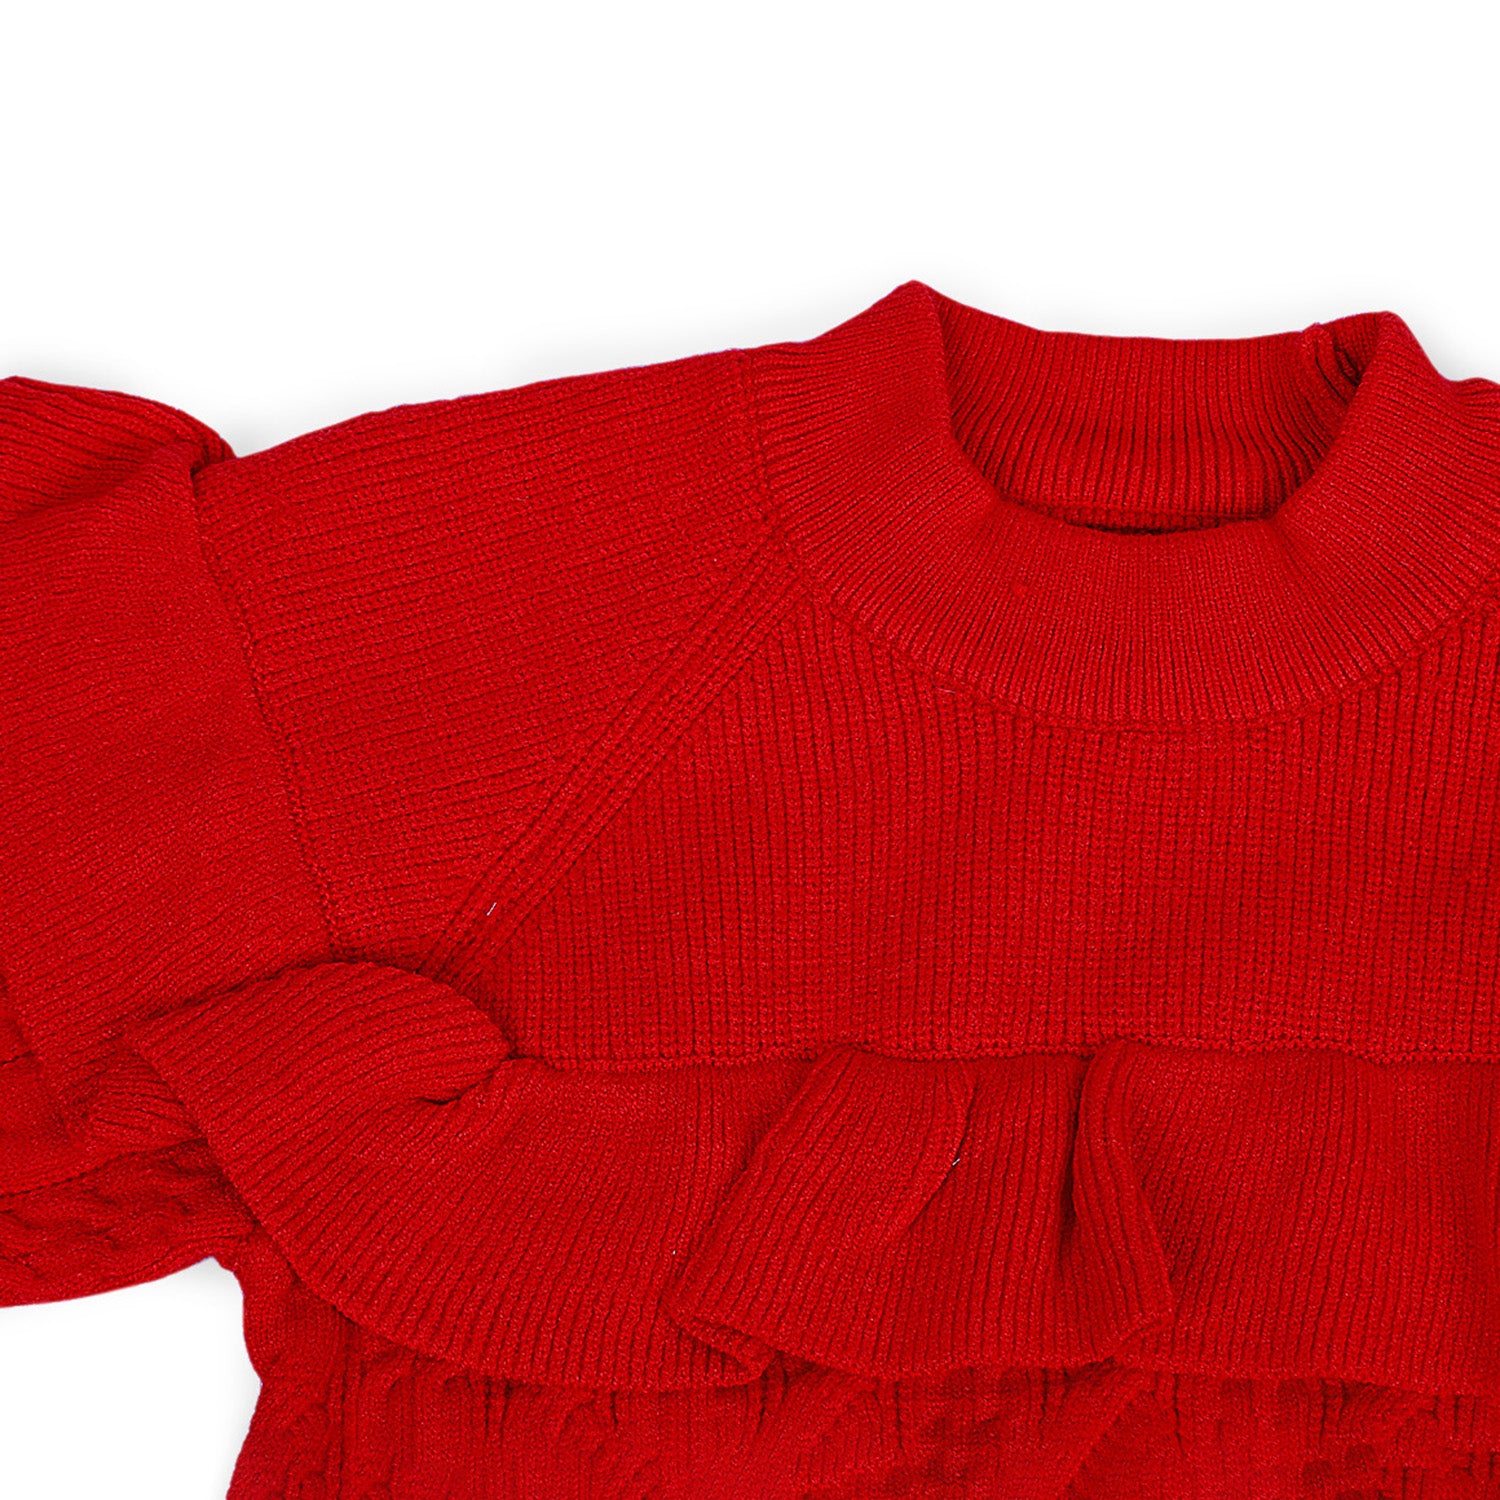 Ruffled Jumper Solid Premium Full Sleeves Braided Knit Sweater - Red